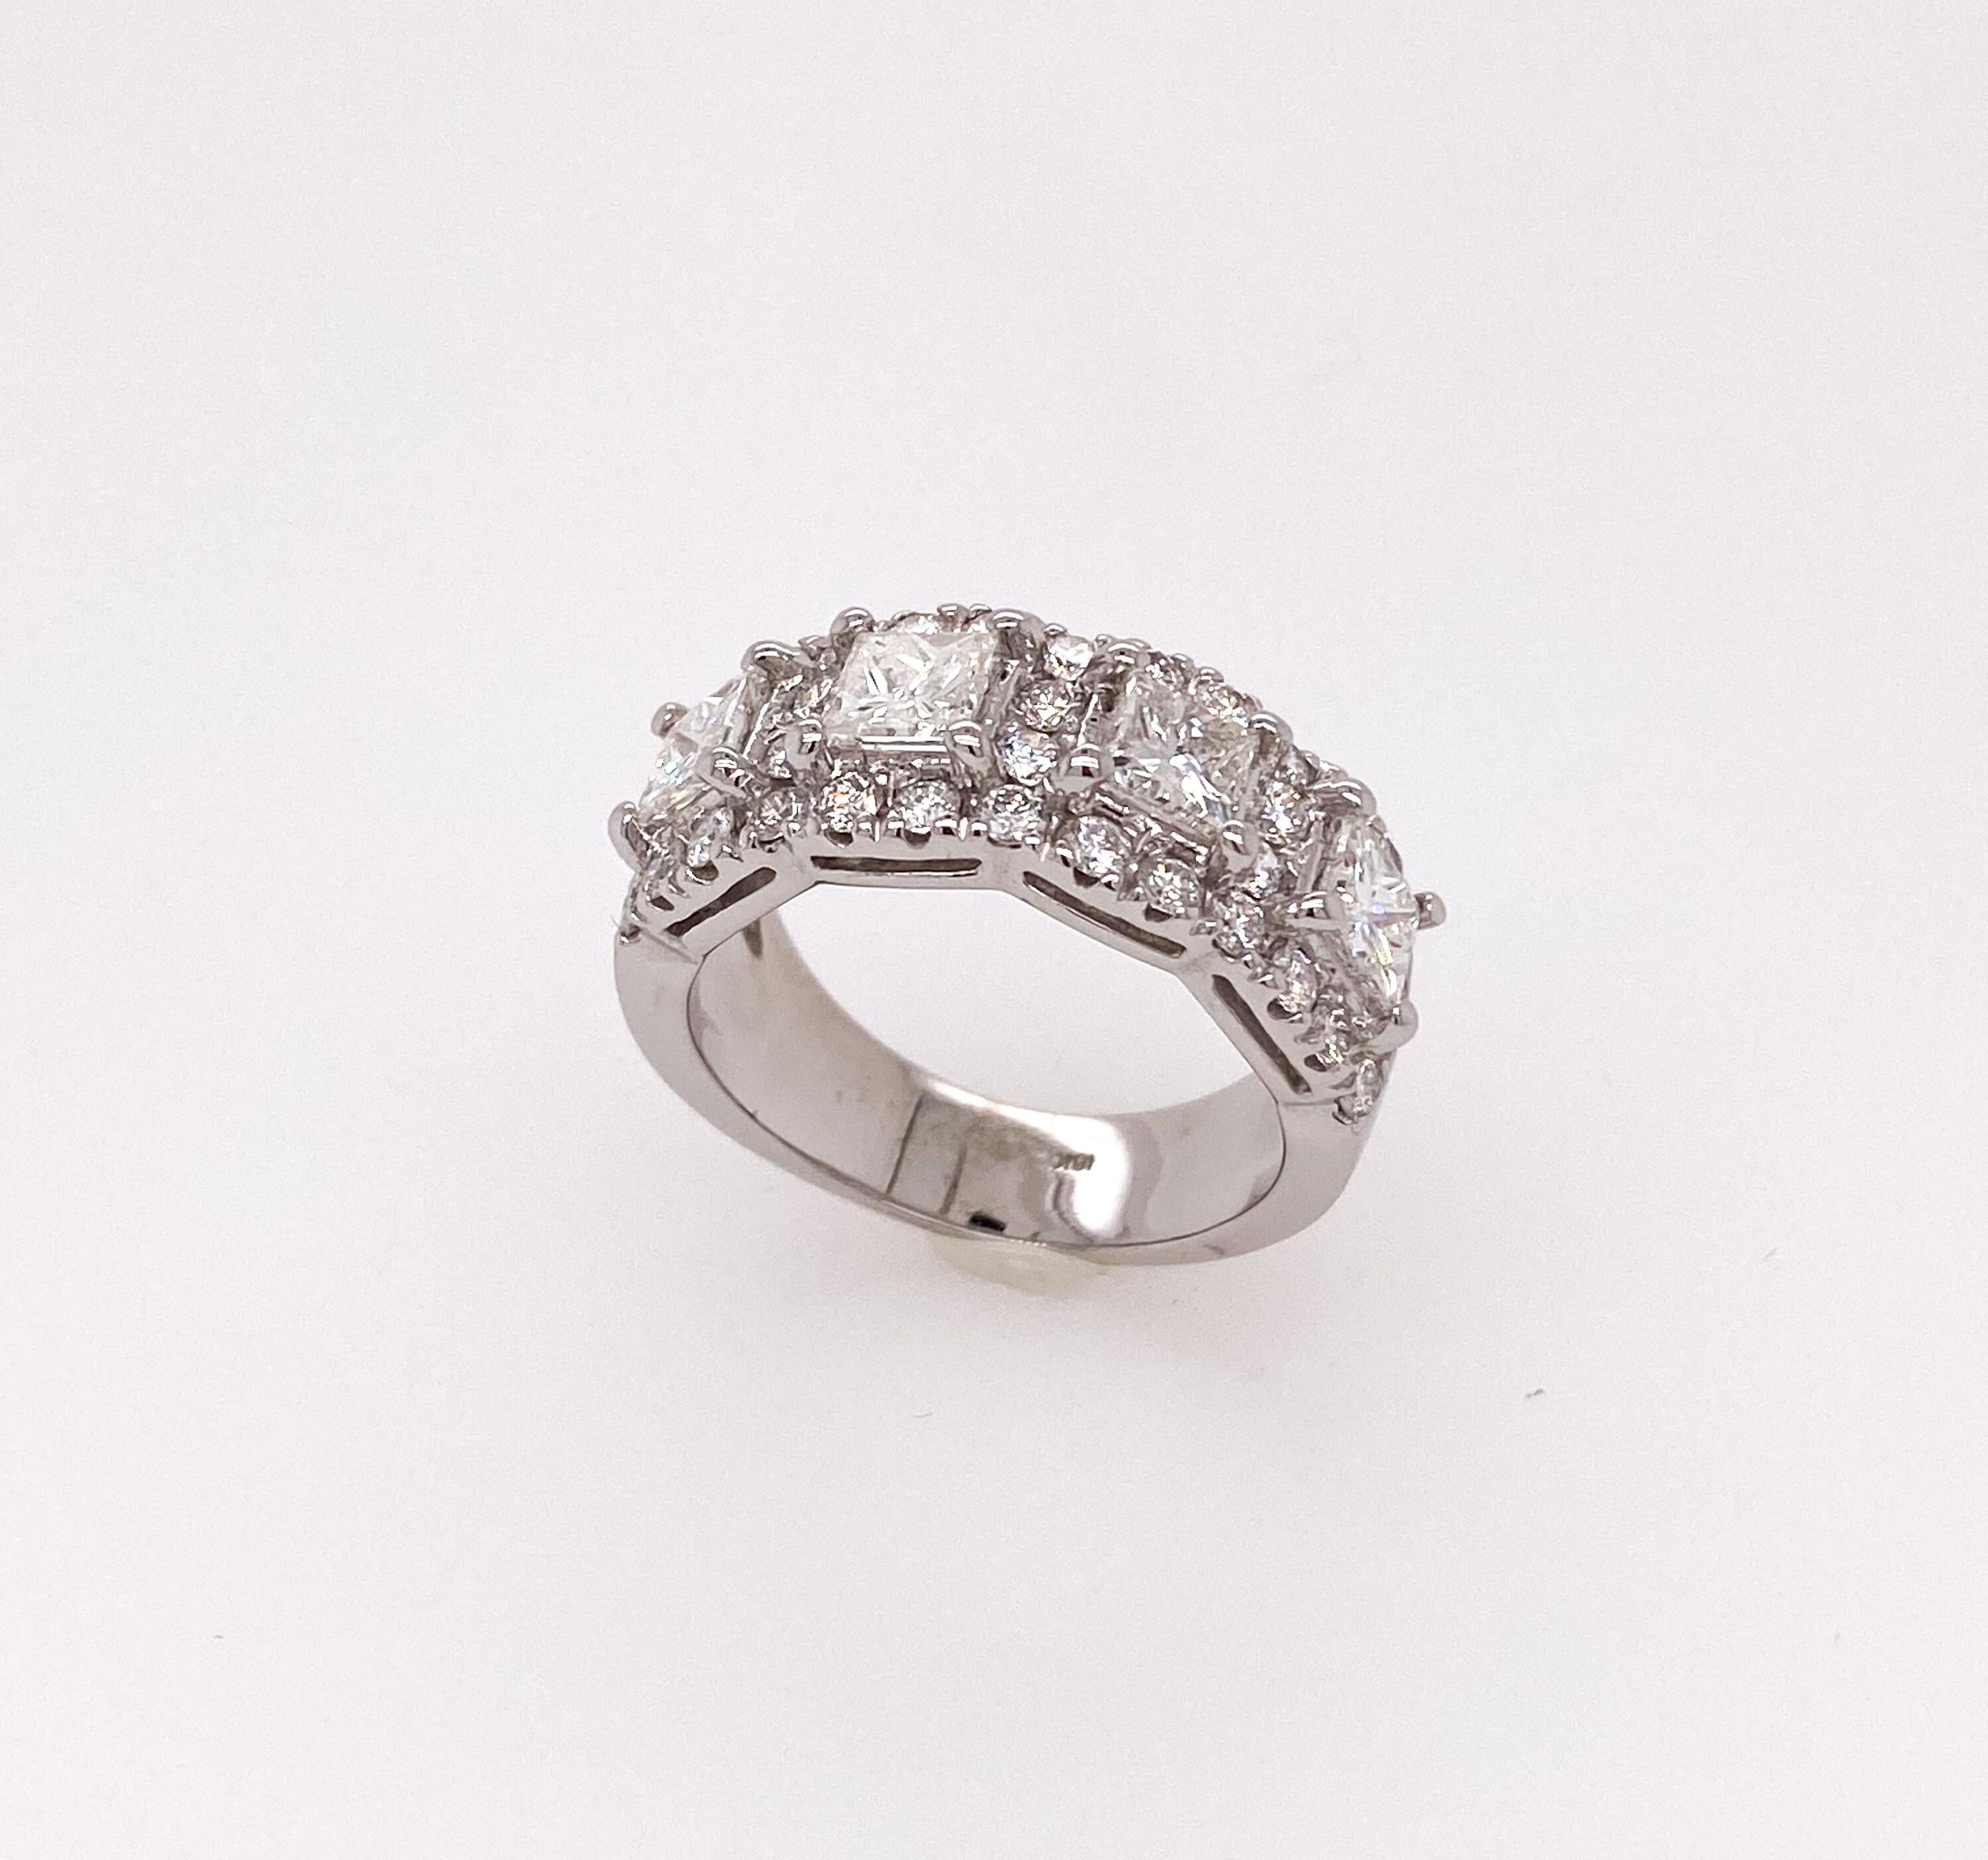 Very classic band with four princess cut diamonds mounted in 18K White Gold and surrounded by additional thirty-six brilliant round cut side diamonds. The band is full of sparkle and can't stop blinking. Perfect for everyday wear or special occasion